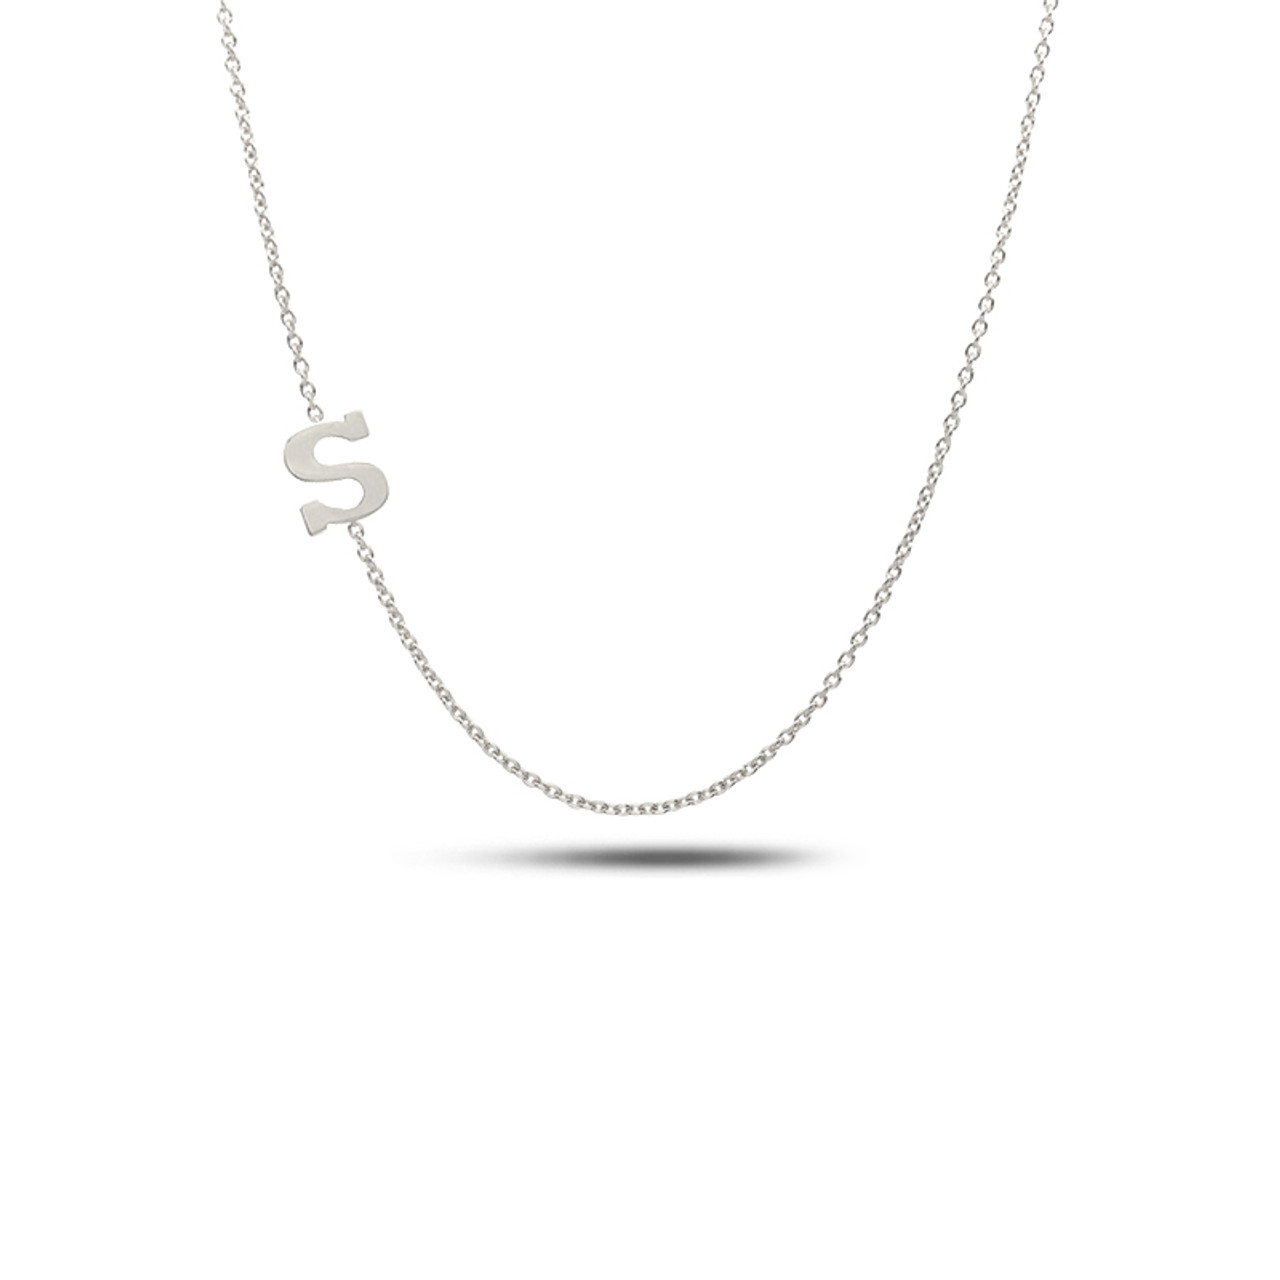 SIMONA Gold Plated Sterling Silver Sideways Initial Necklace | Nordstromrack